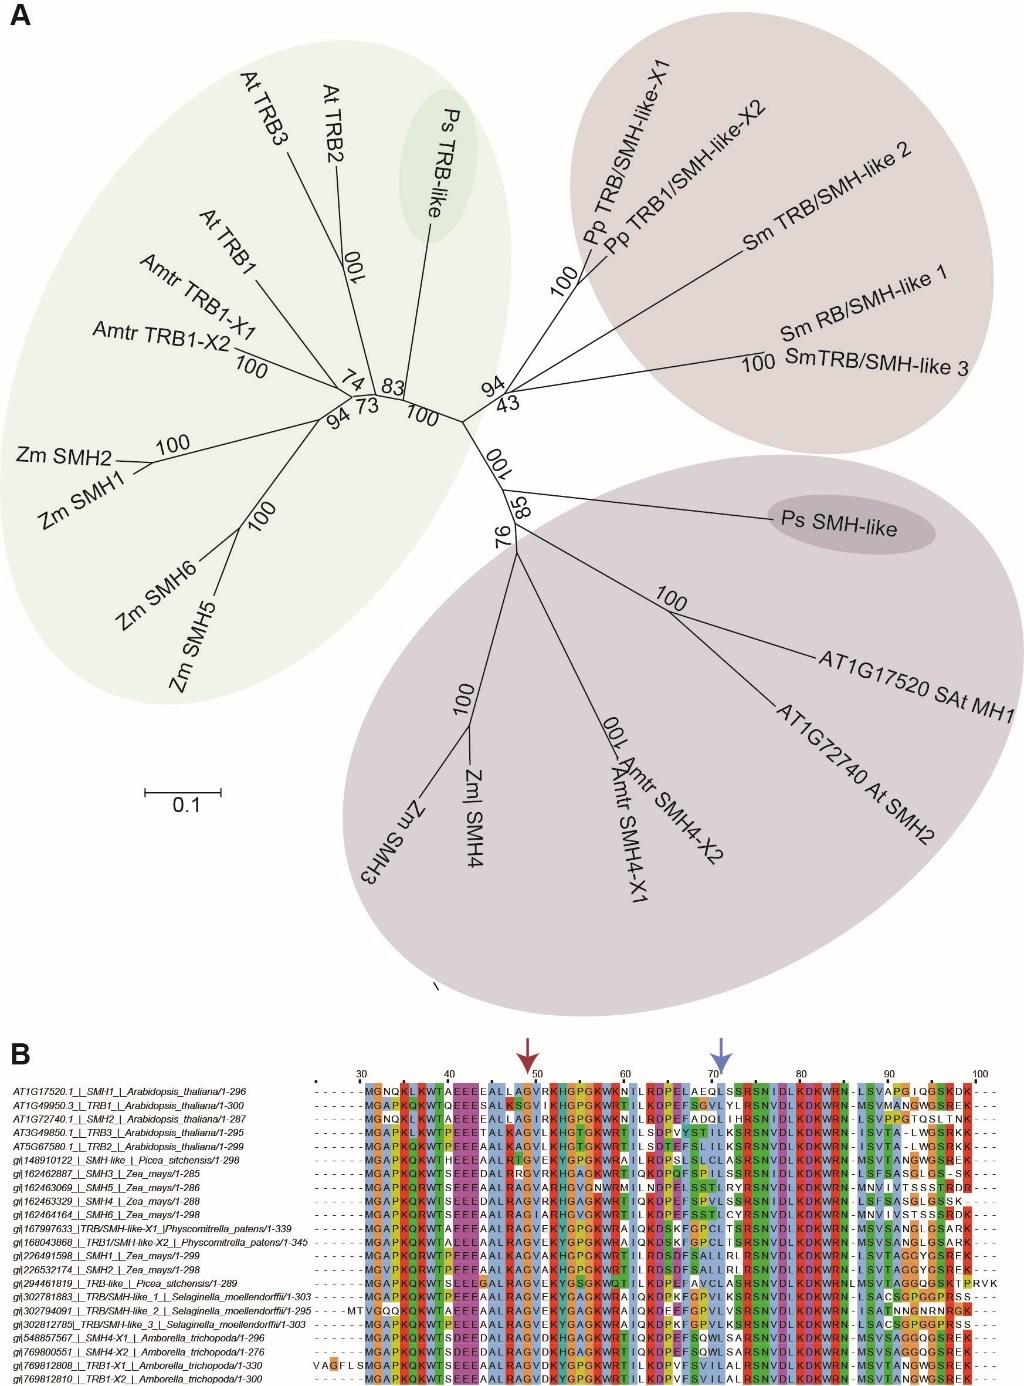 Supplemental Figure 2. Phylogenetic analysis of TRB domain relatives in plants.